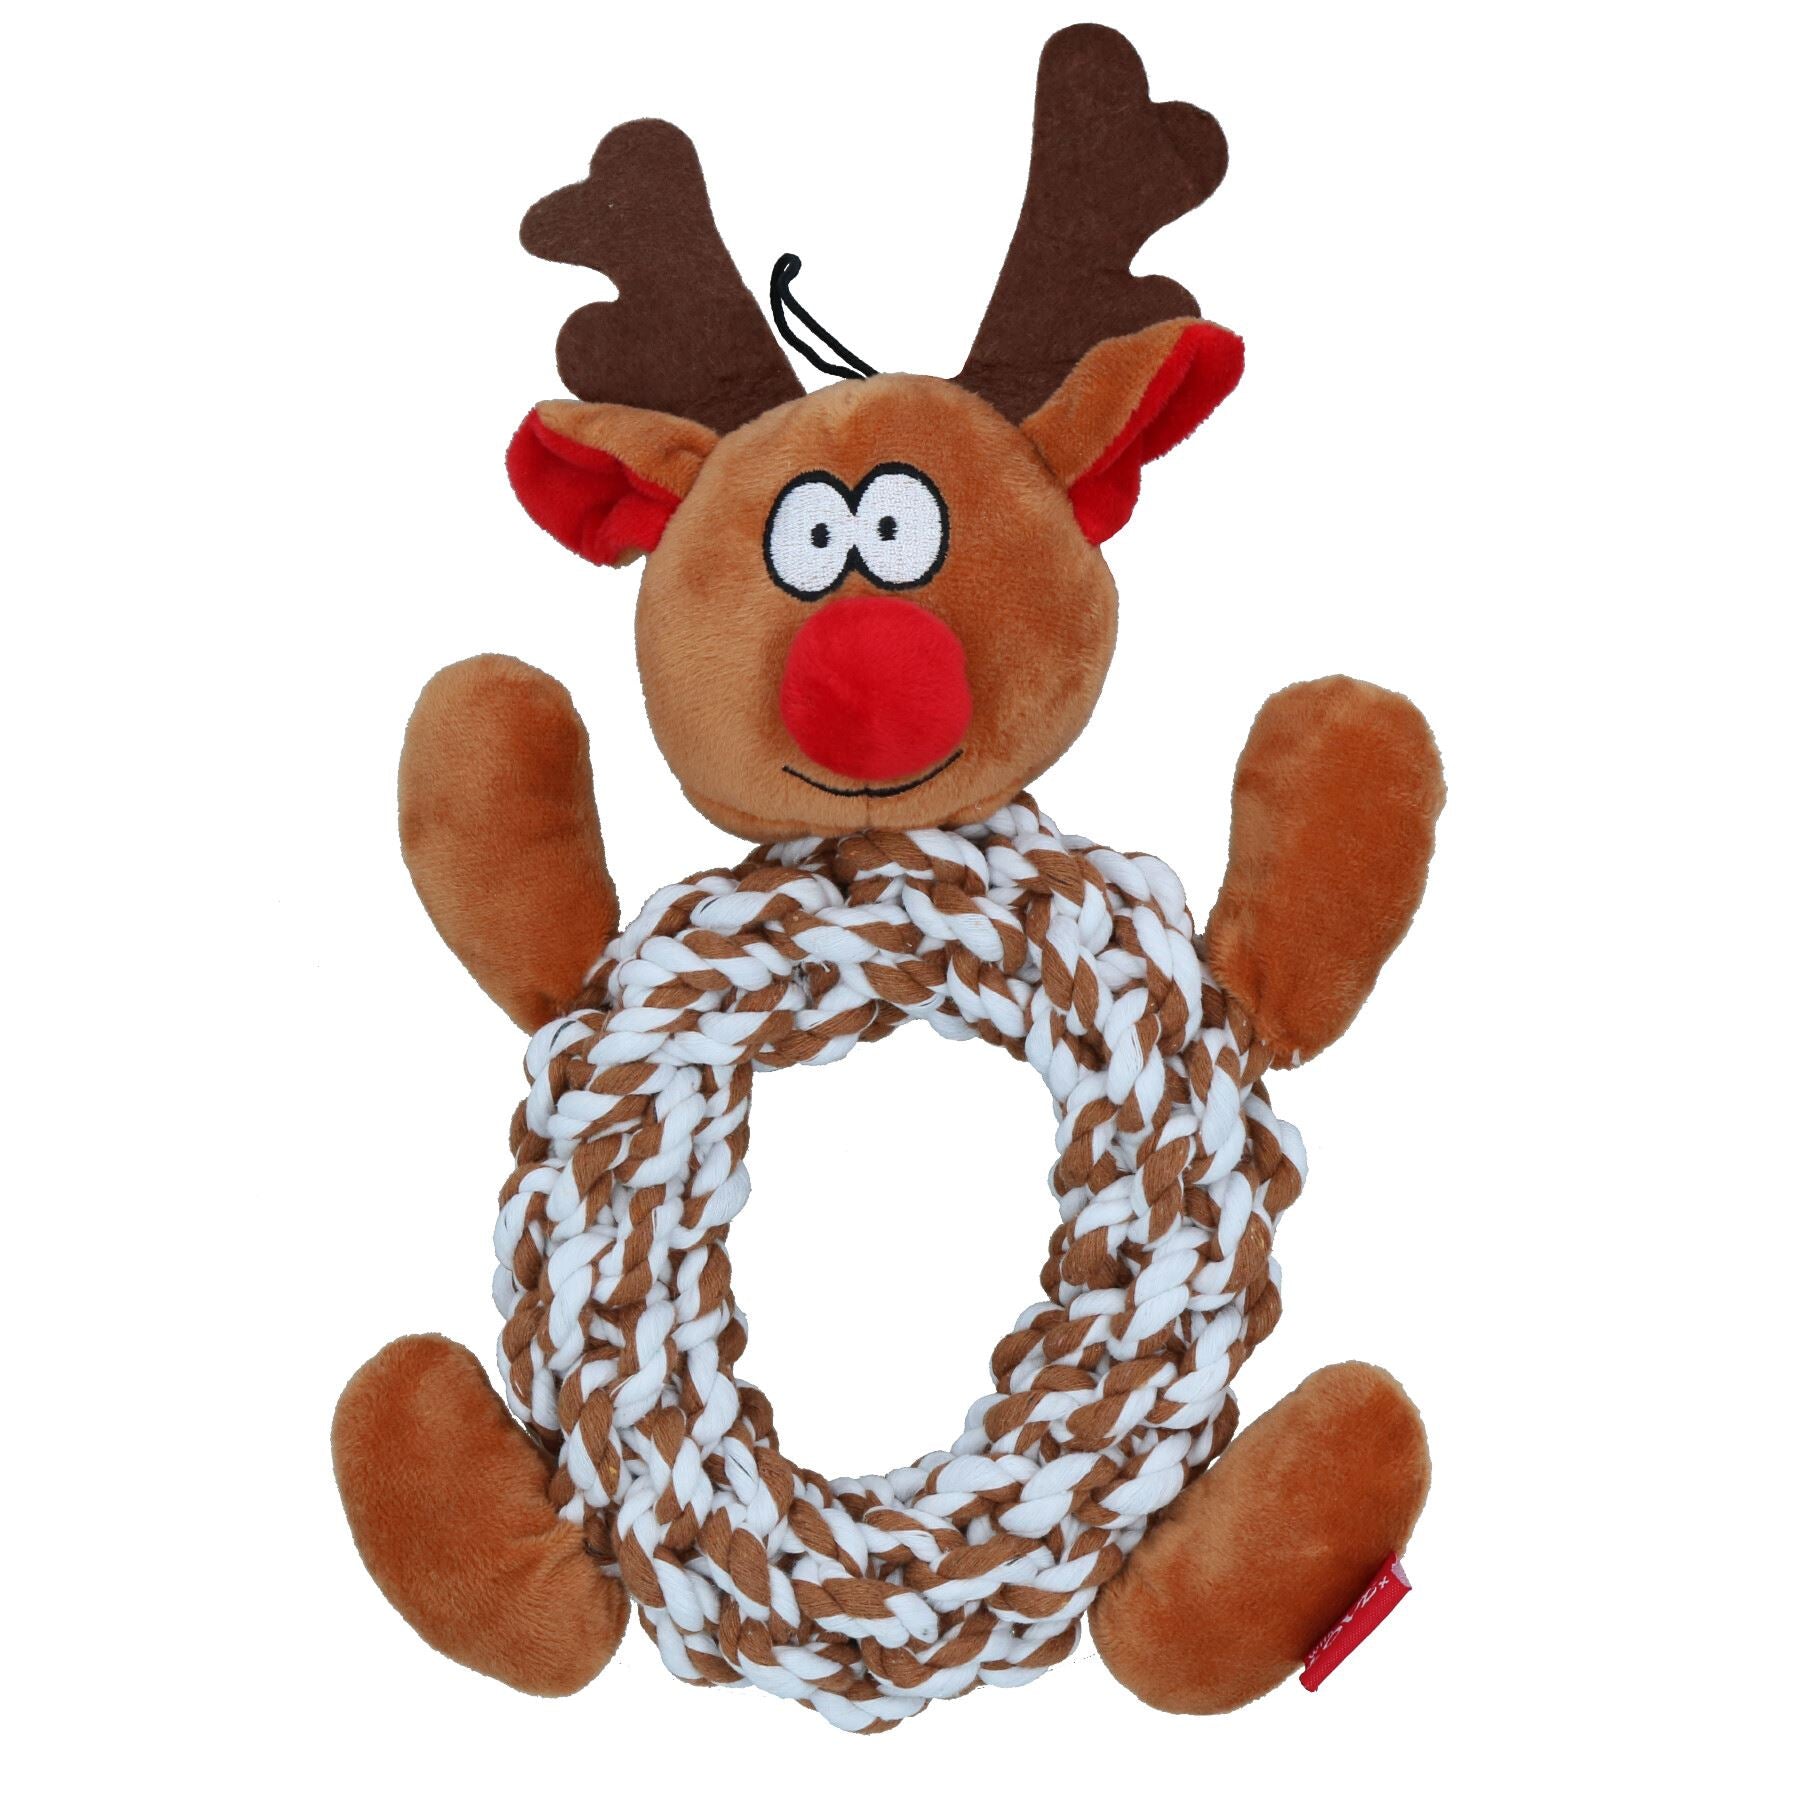 Dog Christmas Gift Knottie Ring Reindeer Squeaky Plush Rope Play Toy Present